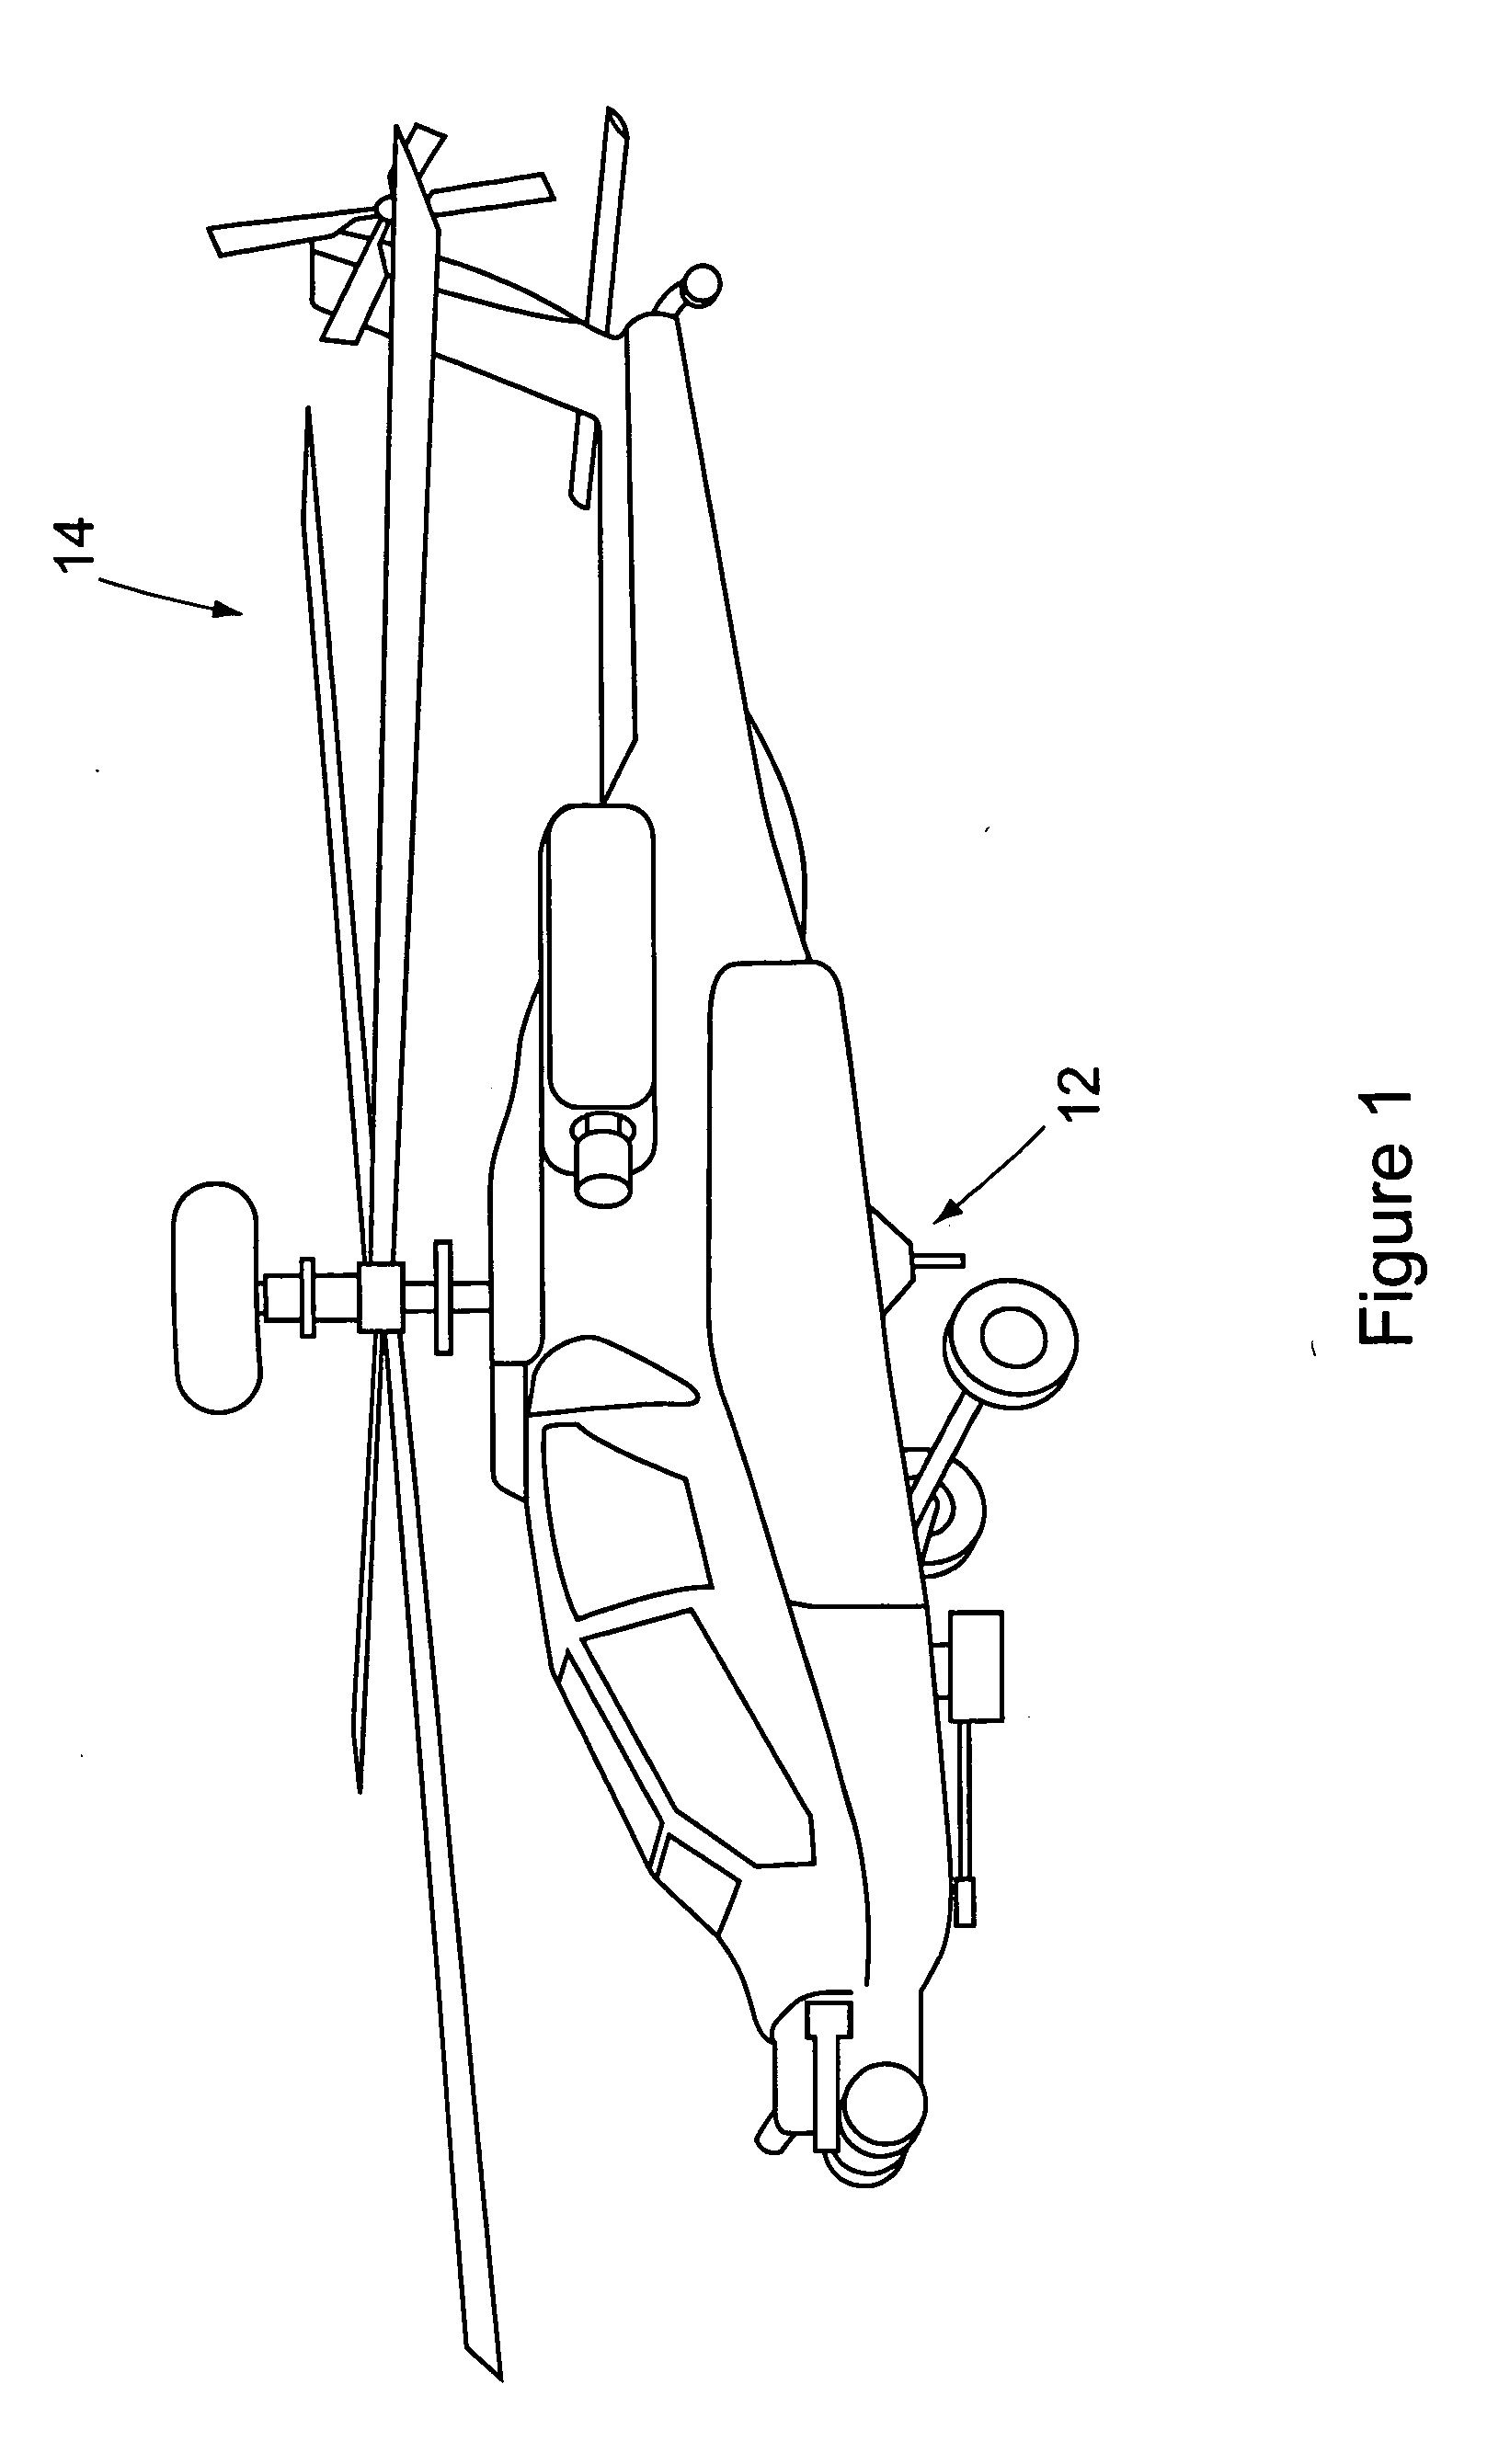 Landing assist apparatus with releasable slip ring